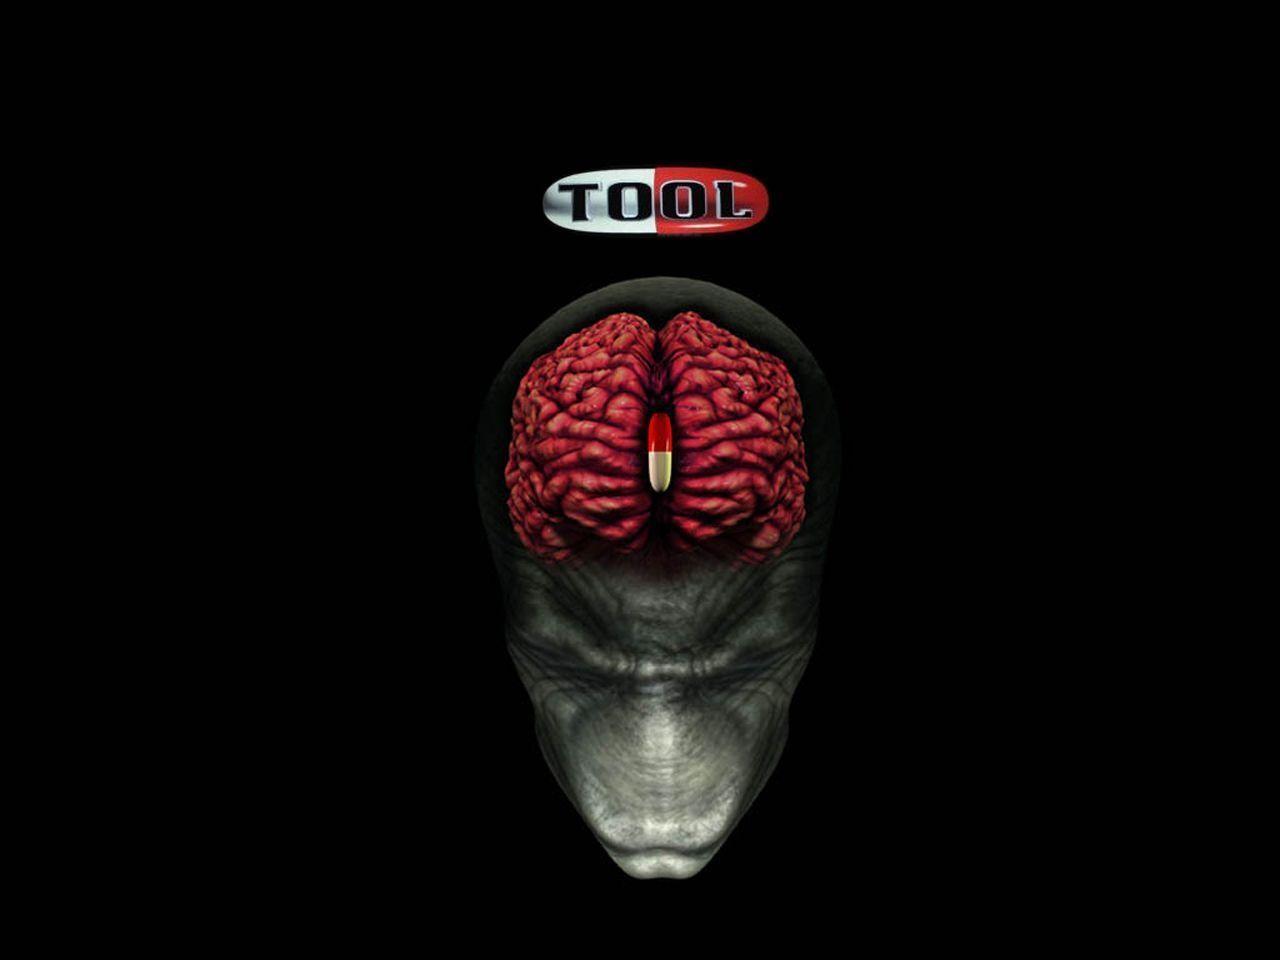 Tool Wallpaper for PC